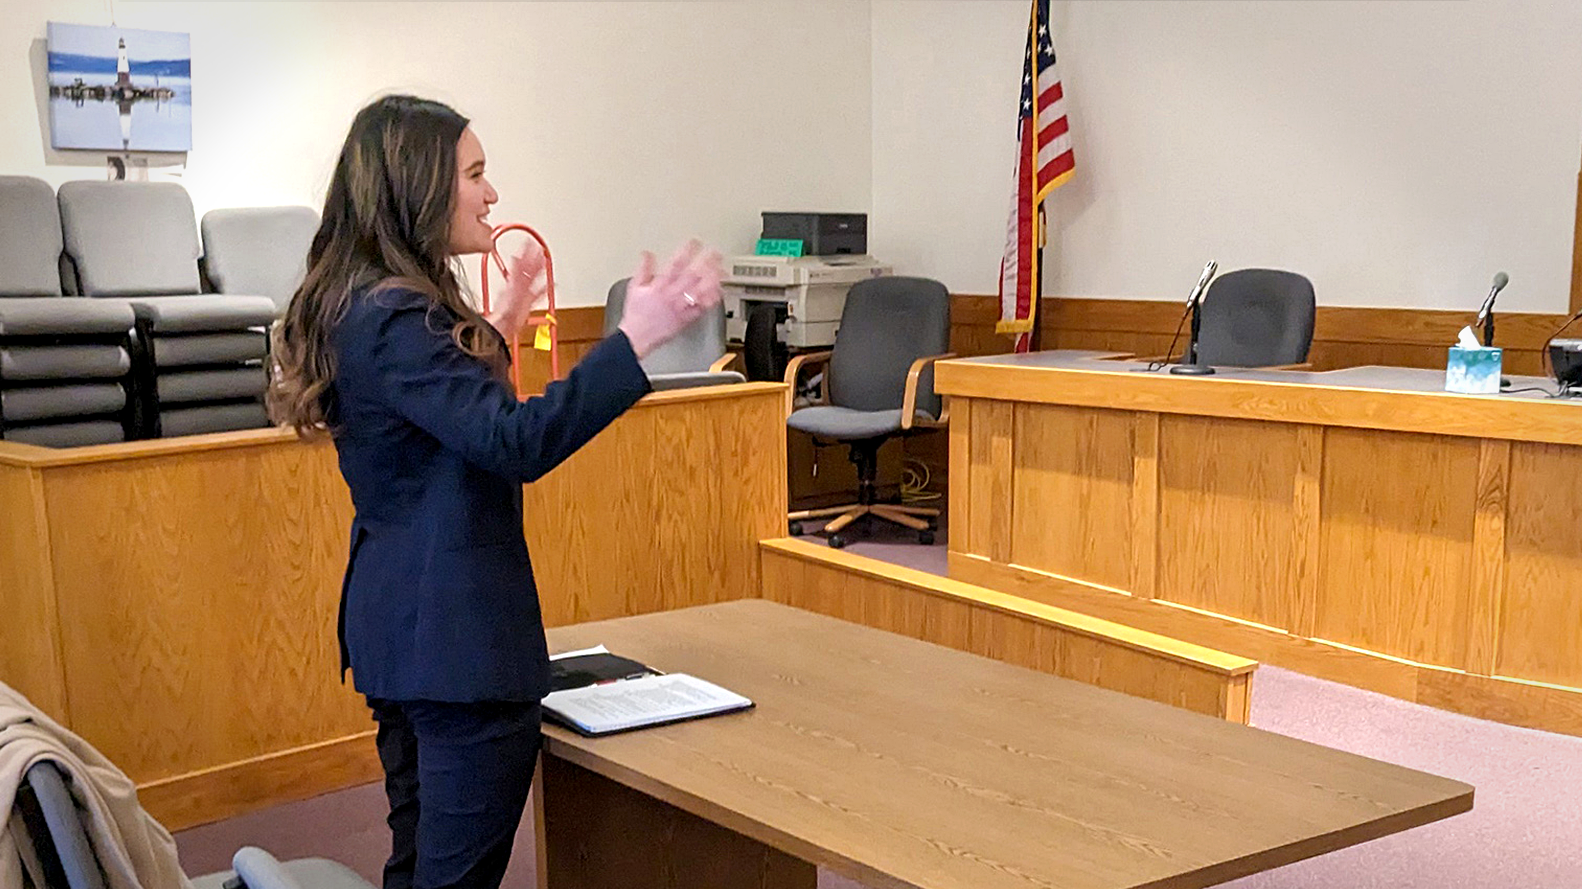 Photo of a woman wearing a navy suit standing in a court room behind a wooden table. She is gesturing her hands in the air towards the right side of the frame and appears to be speaking.